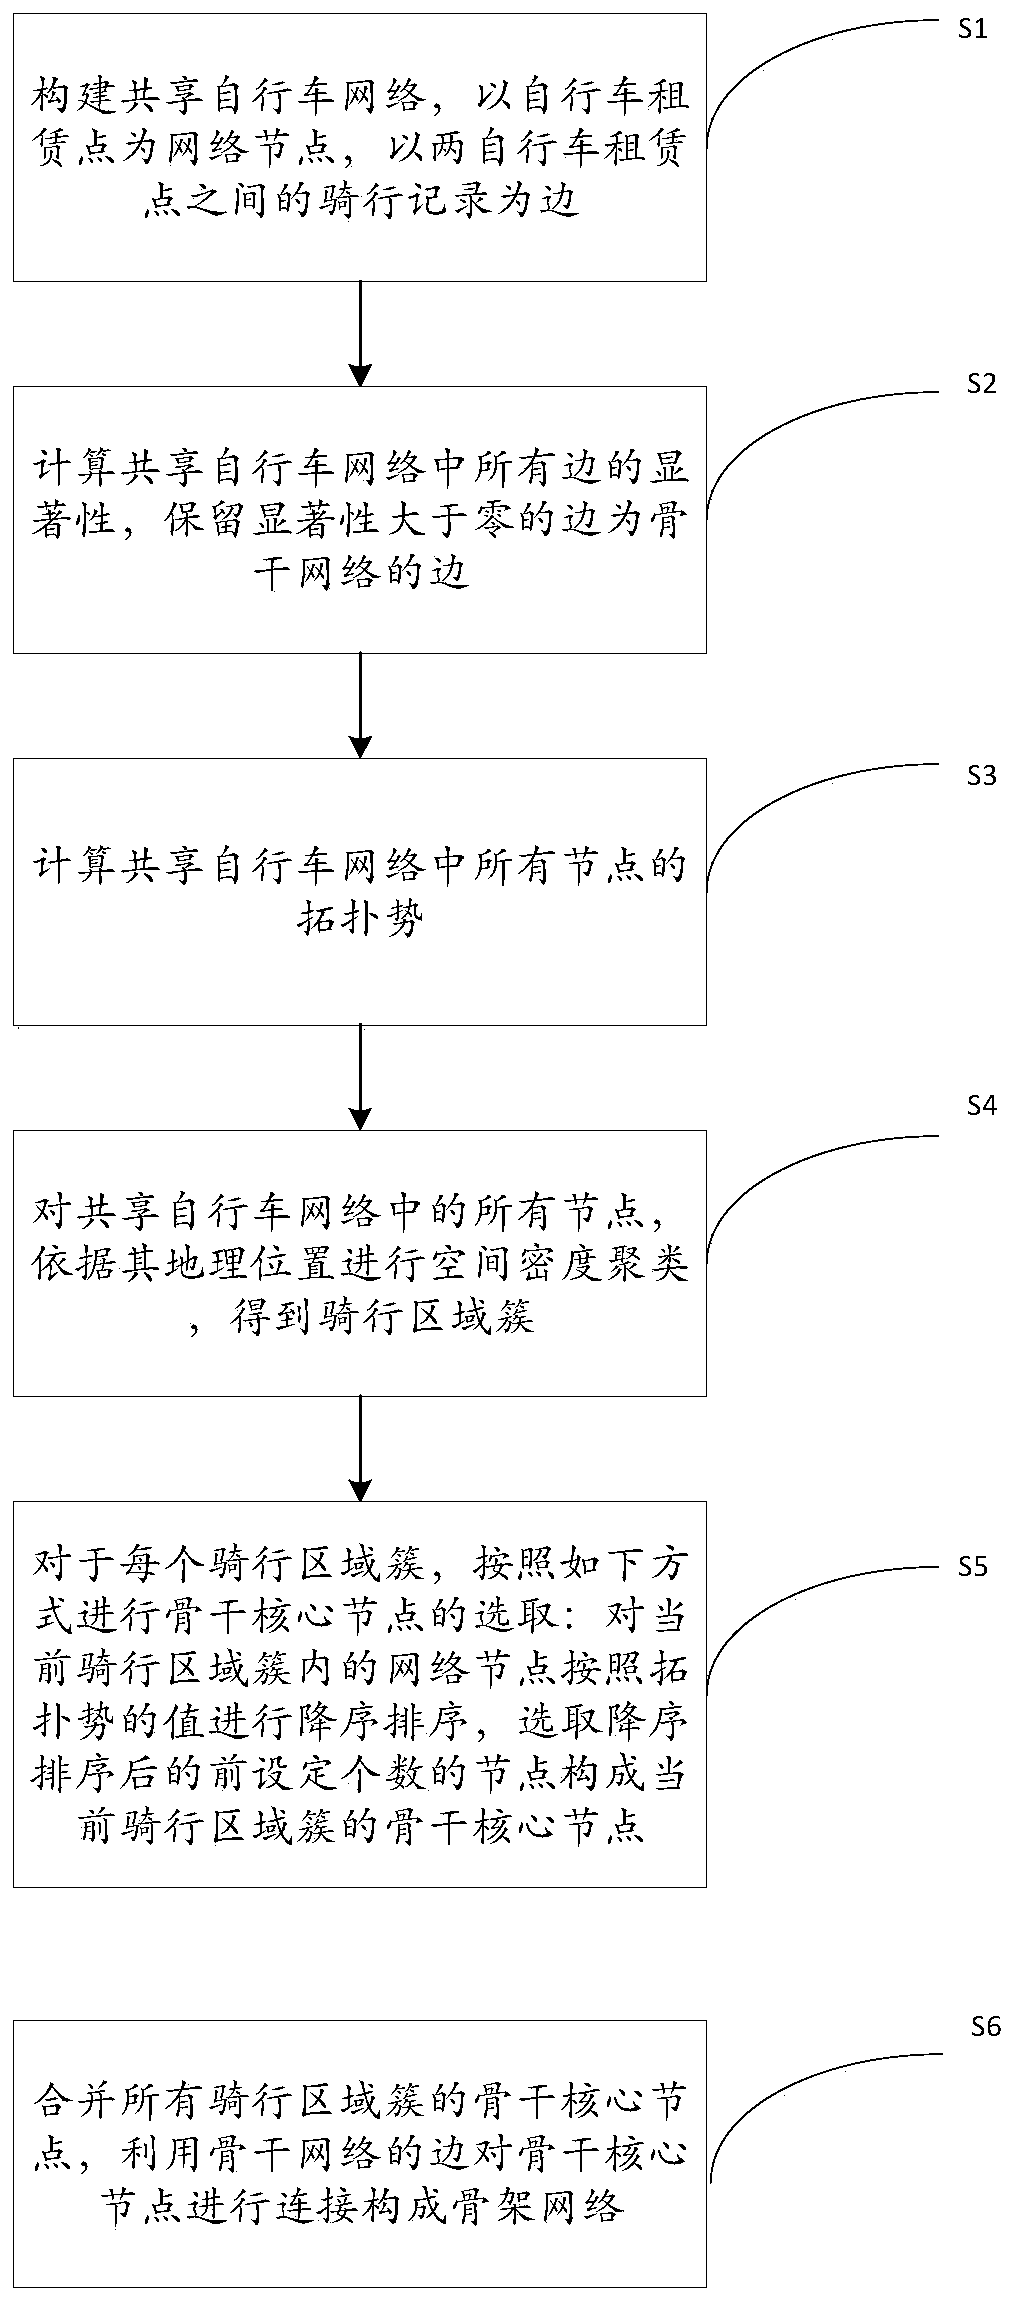 Shared bicycle skeleton network extraction method